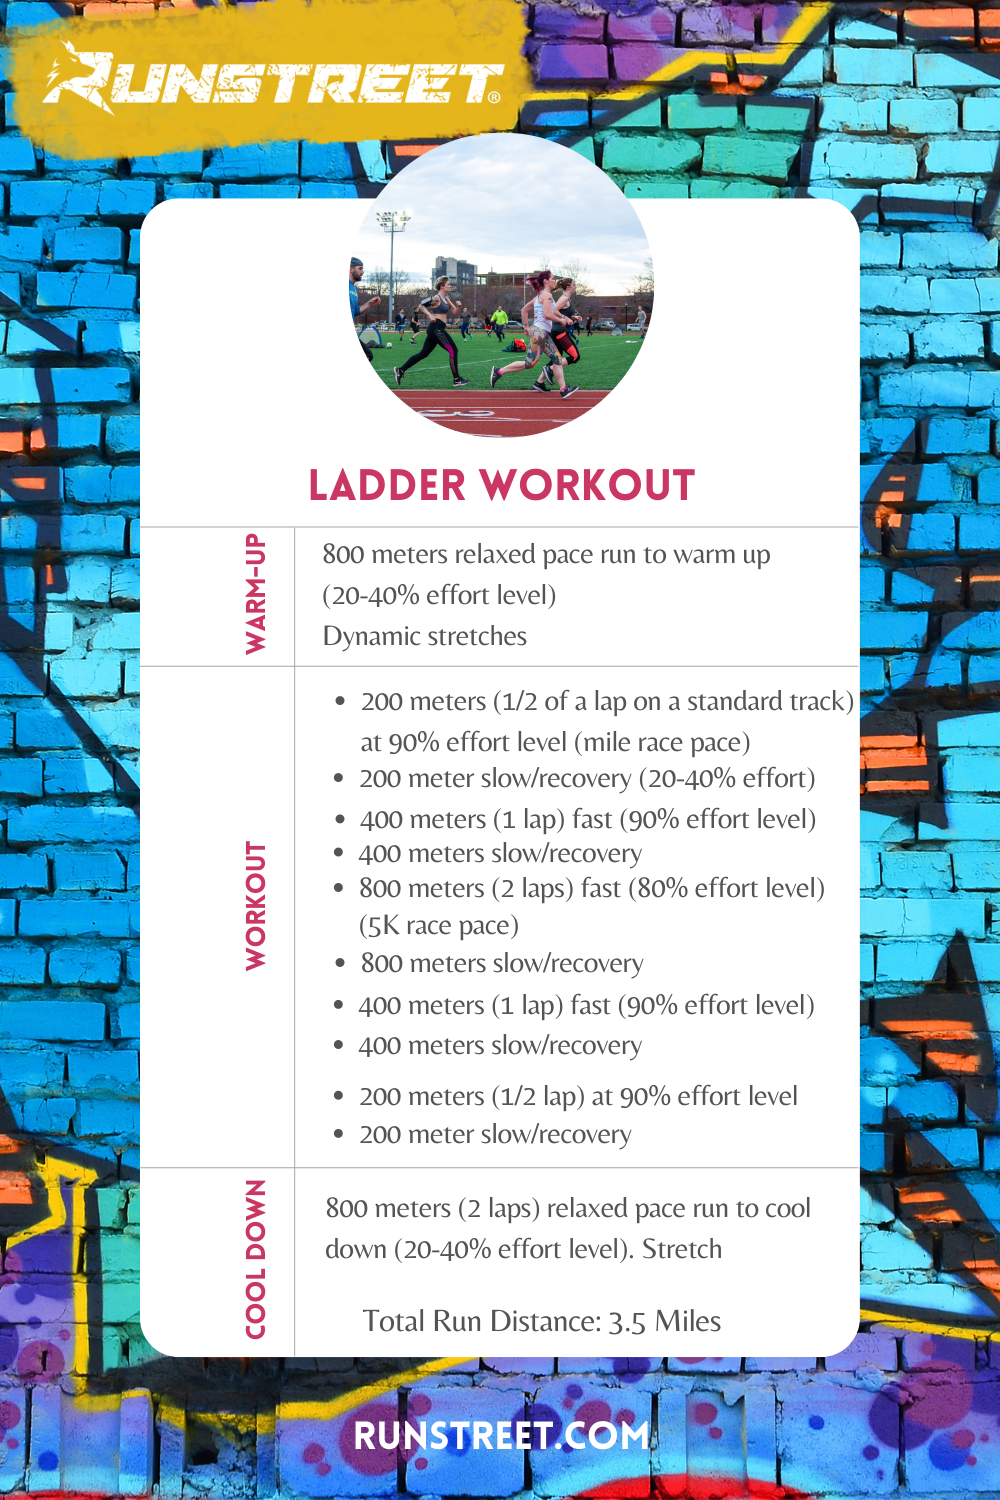 How To Do A Ladder Workout For Runners